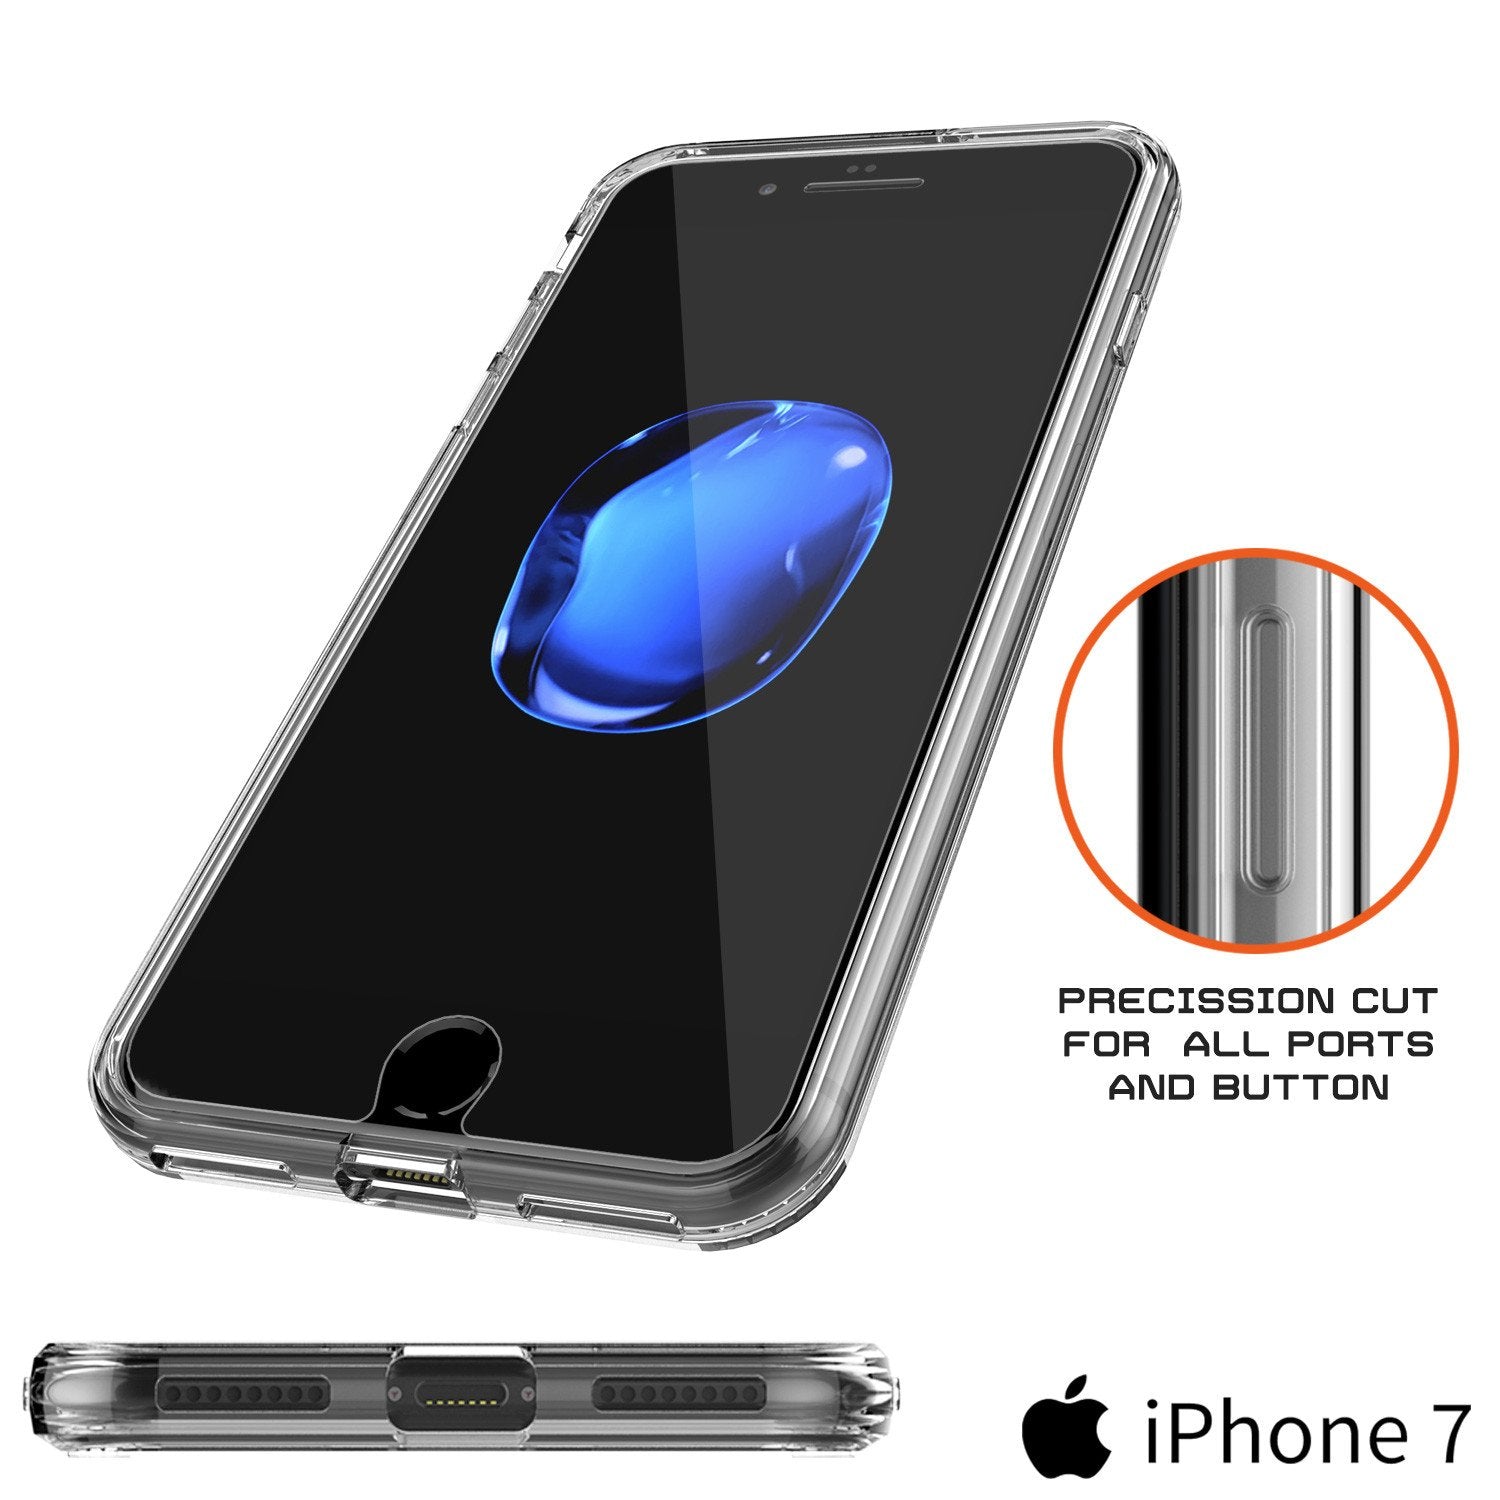 iPhone 7 Case Punkcase® LUCID 2.0 Clear Series Series w/ PUNK SHIELD Screen Protector | Ultra Fit